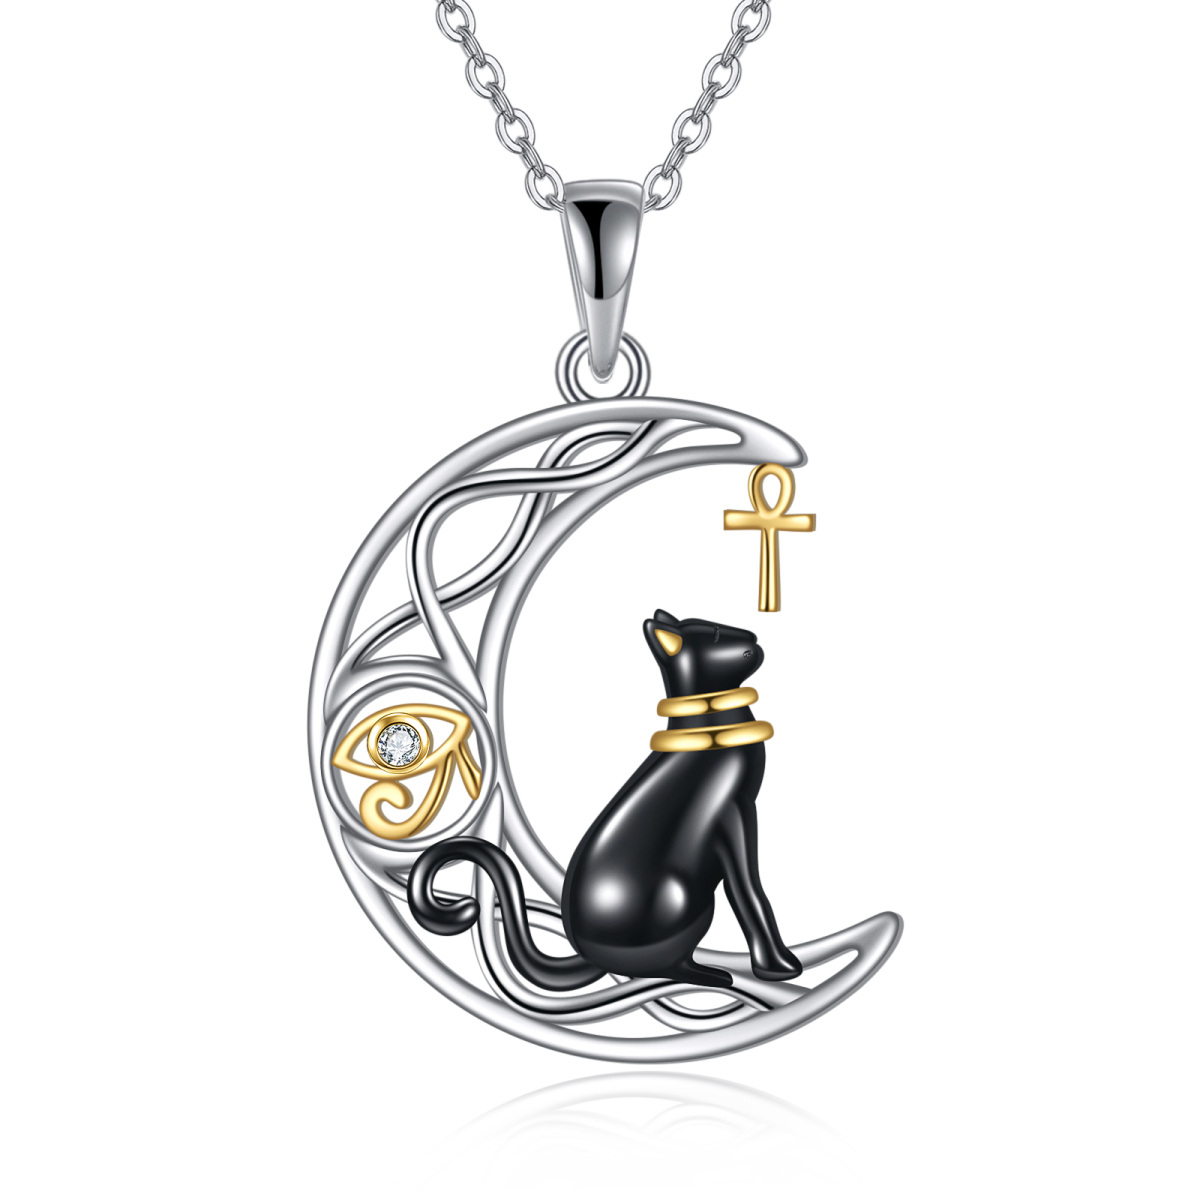 Egyptian Bastet Cat Necklace Black Cat Jewelry 925 Sterling Silver-1